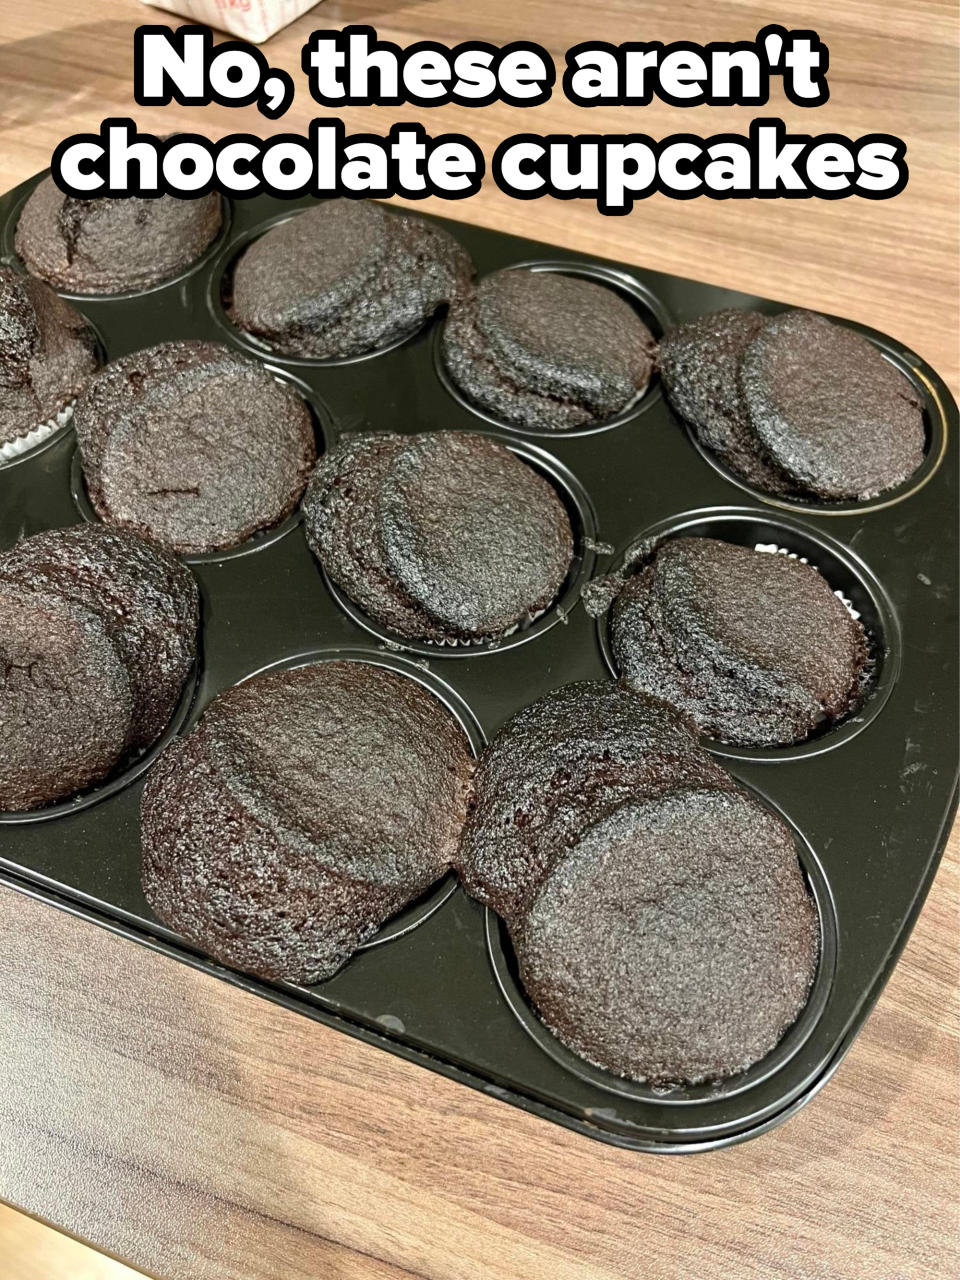 Burnt cupcakes in a pan, with caption, "No, these aren't chocolate cupcakes"